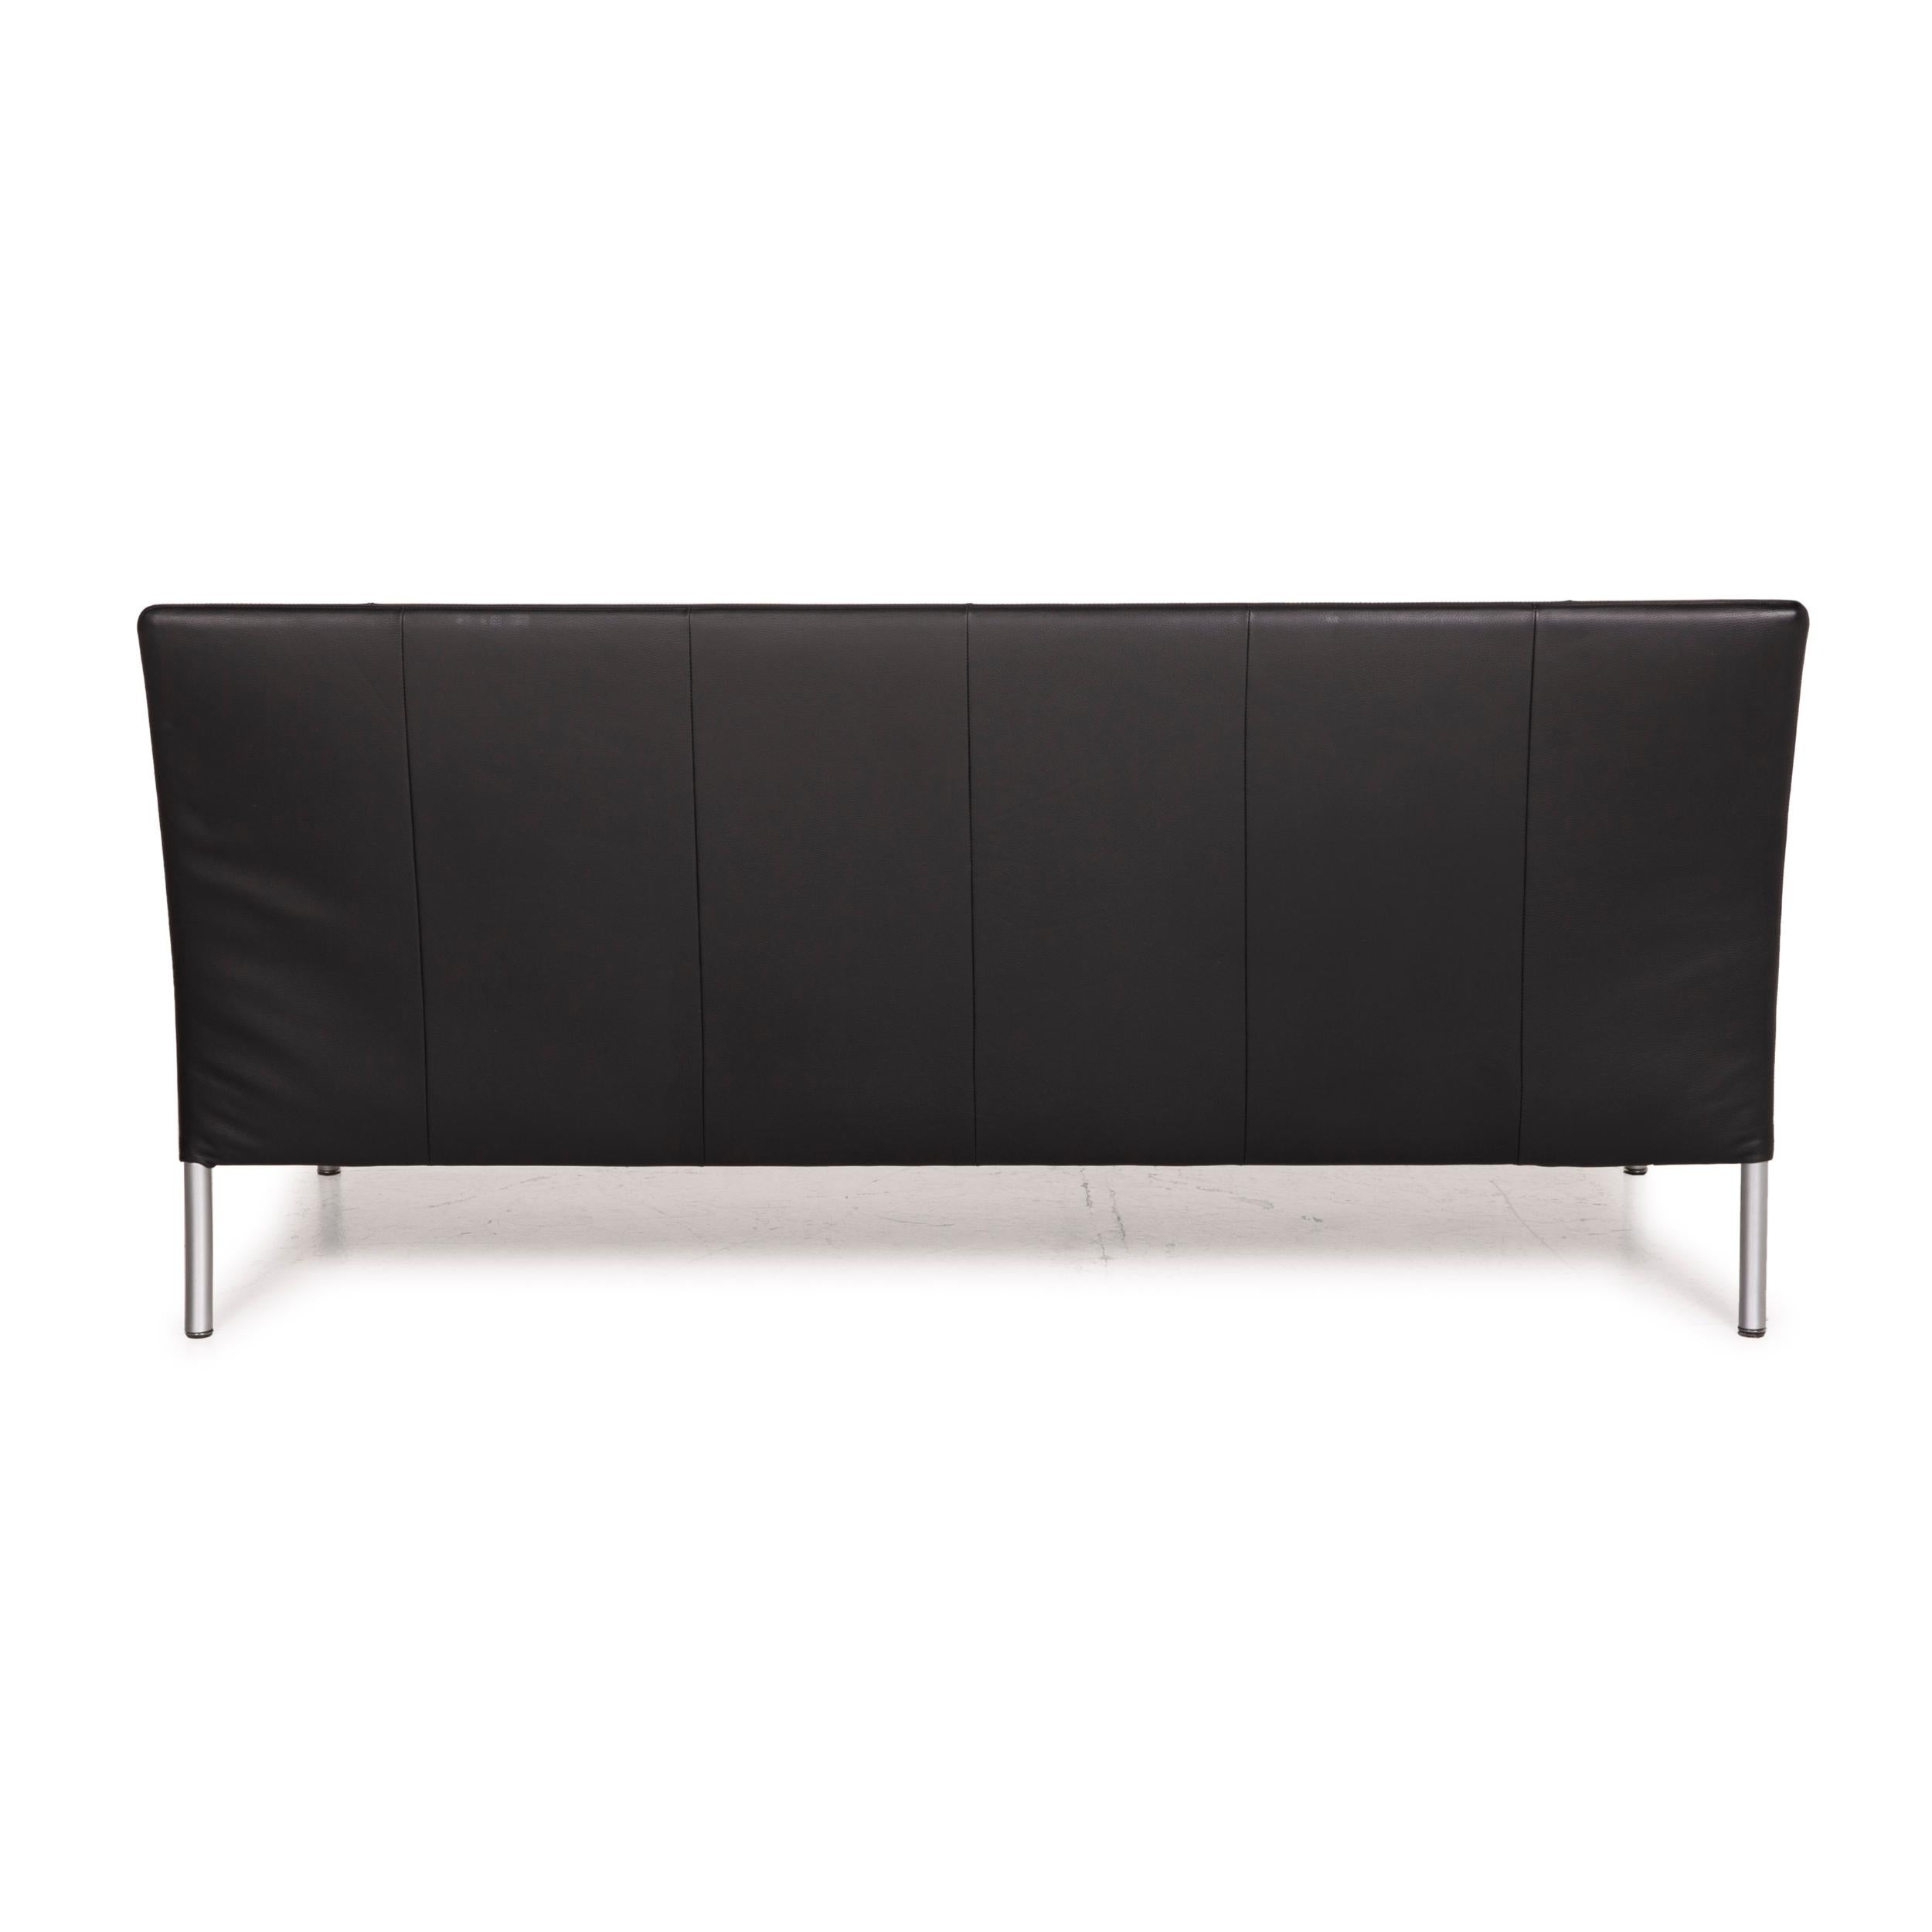 Contemporary Walter Knoll Jason 390 Leather Sofa Black Two-Seater